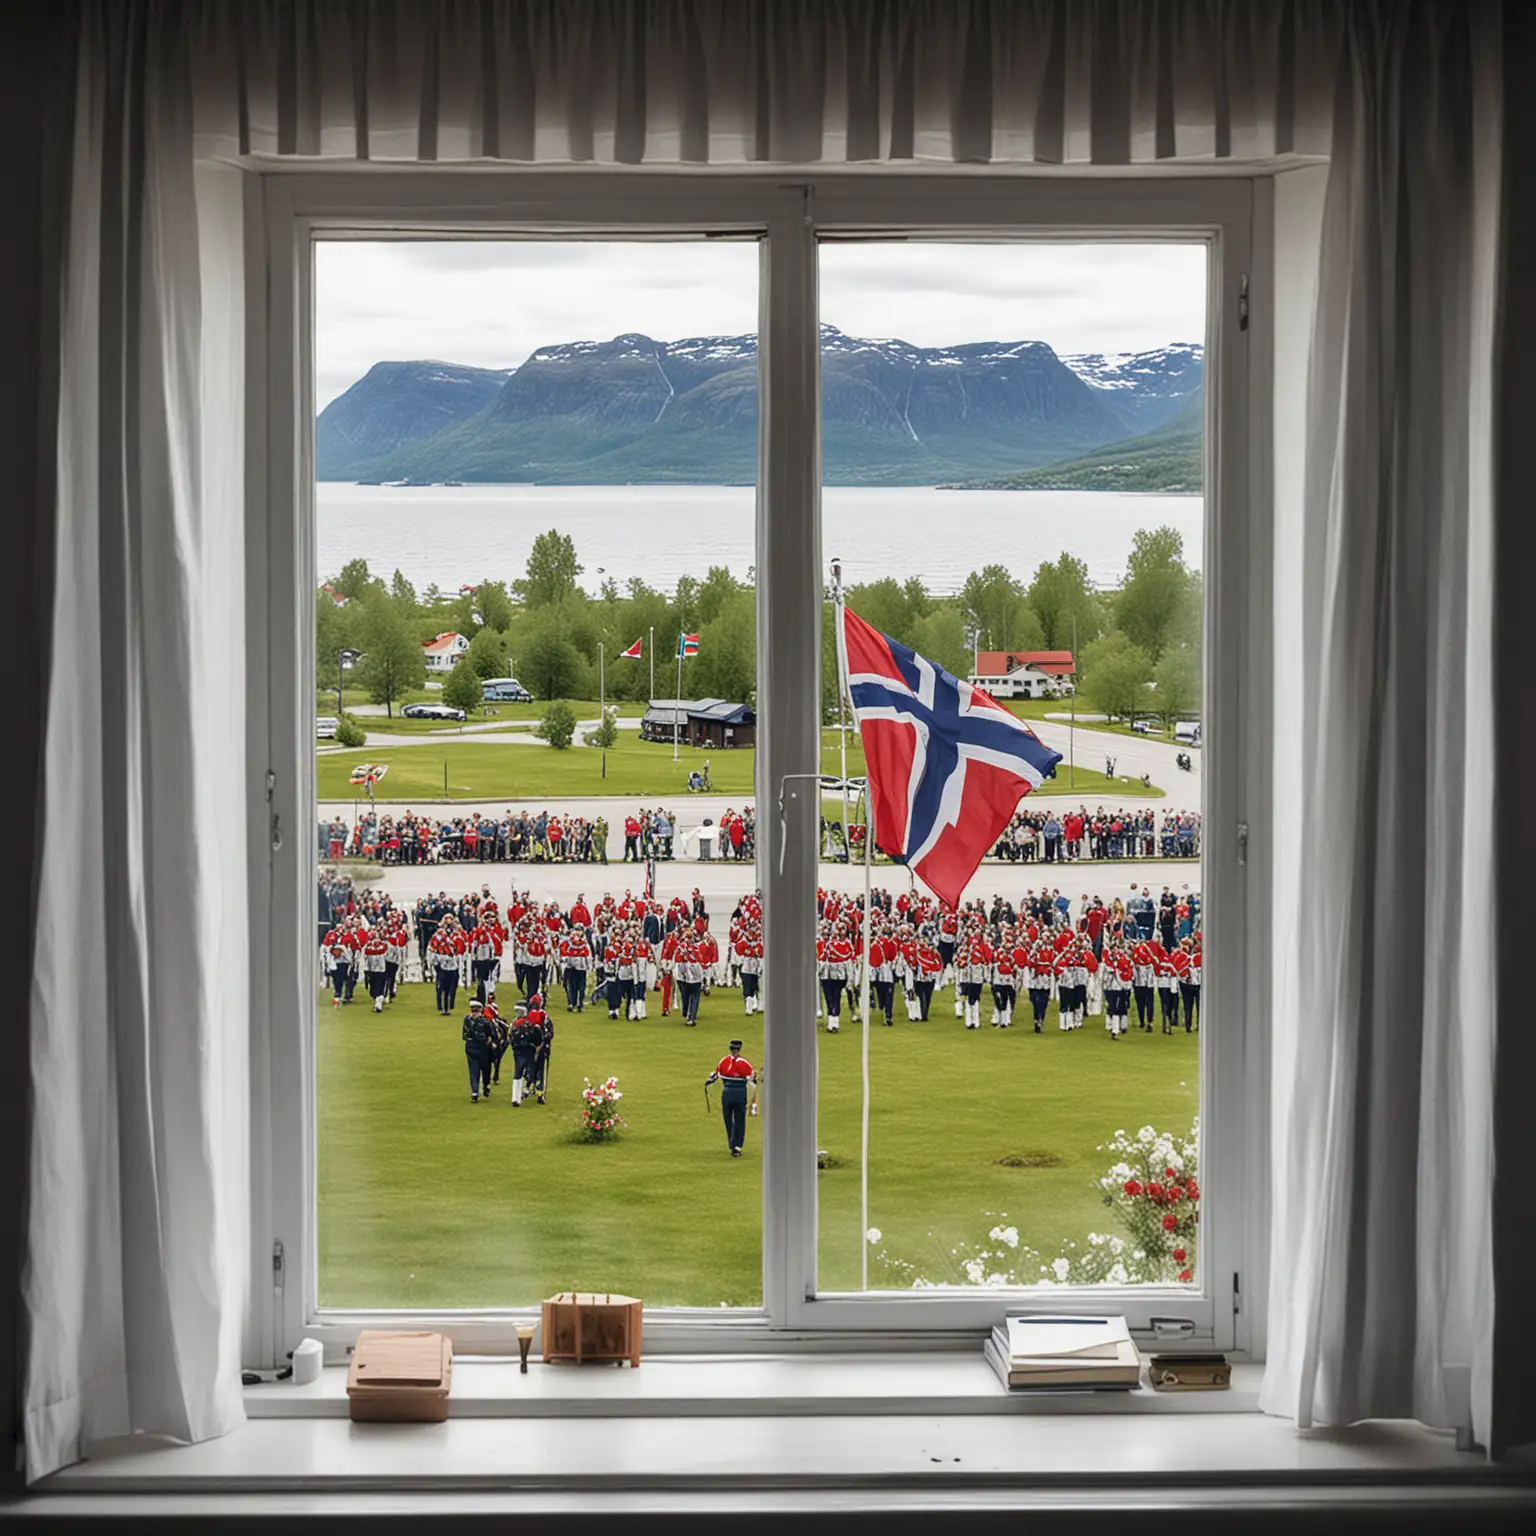 17th of may celebration in norway, norwegian flag, parade, from the view of a living room window, album cover